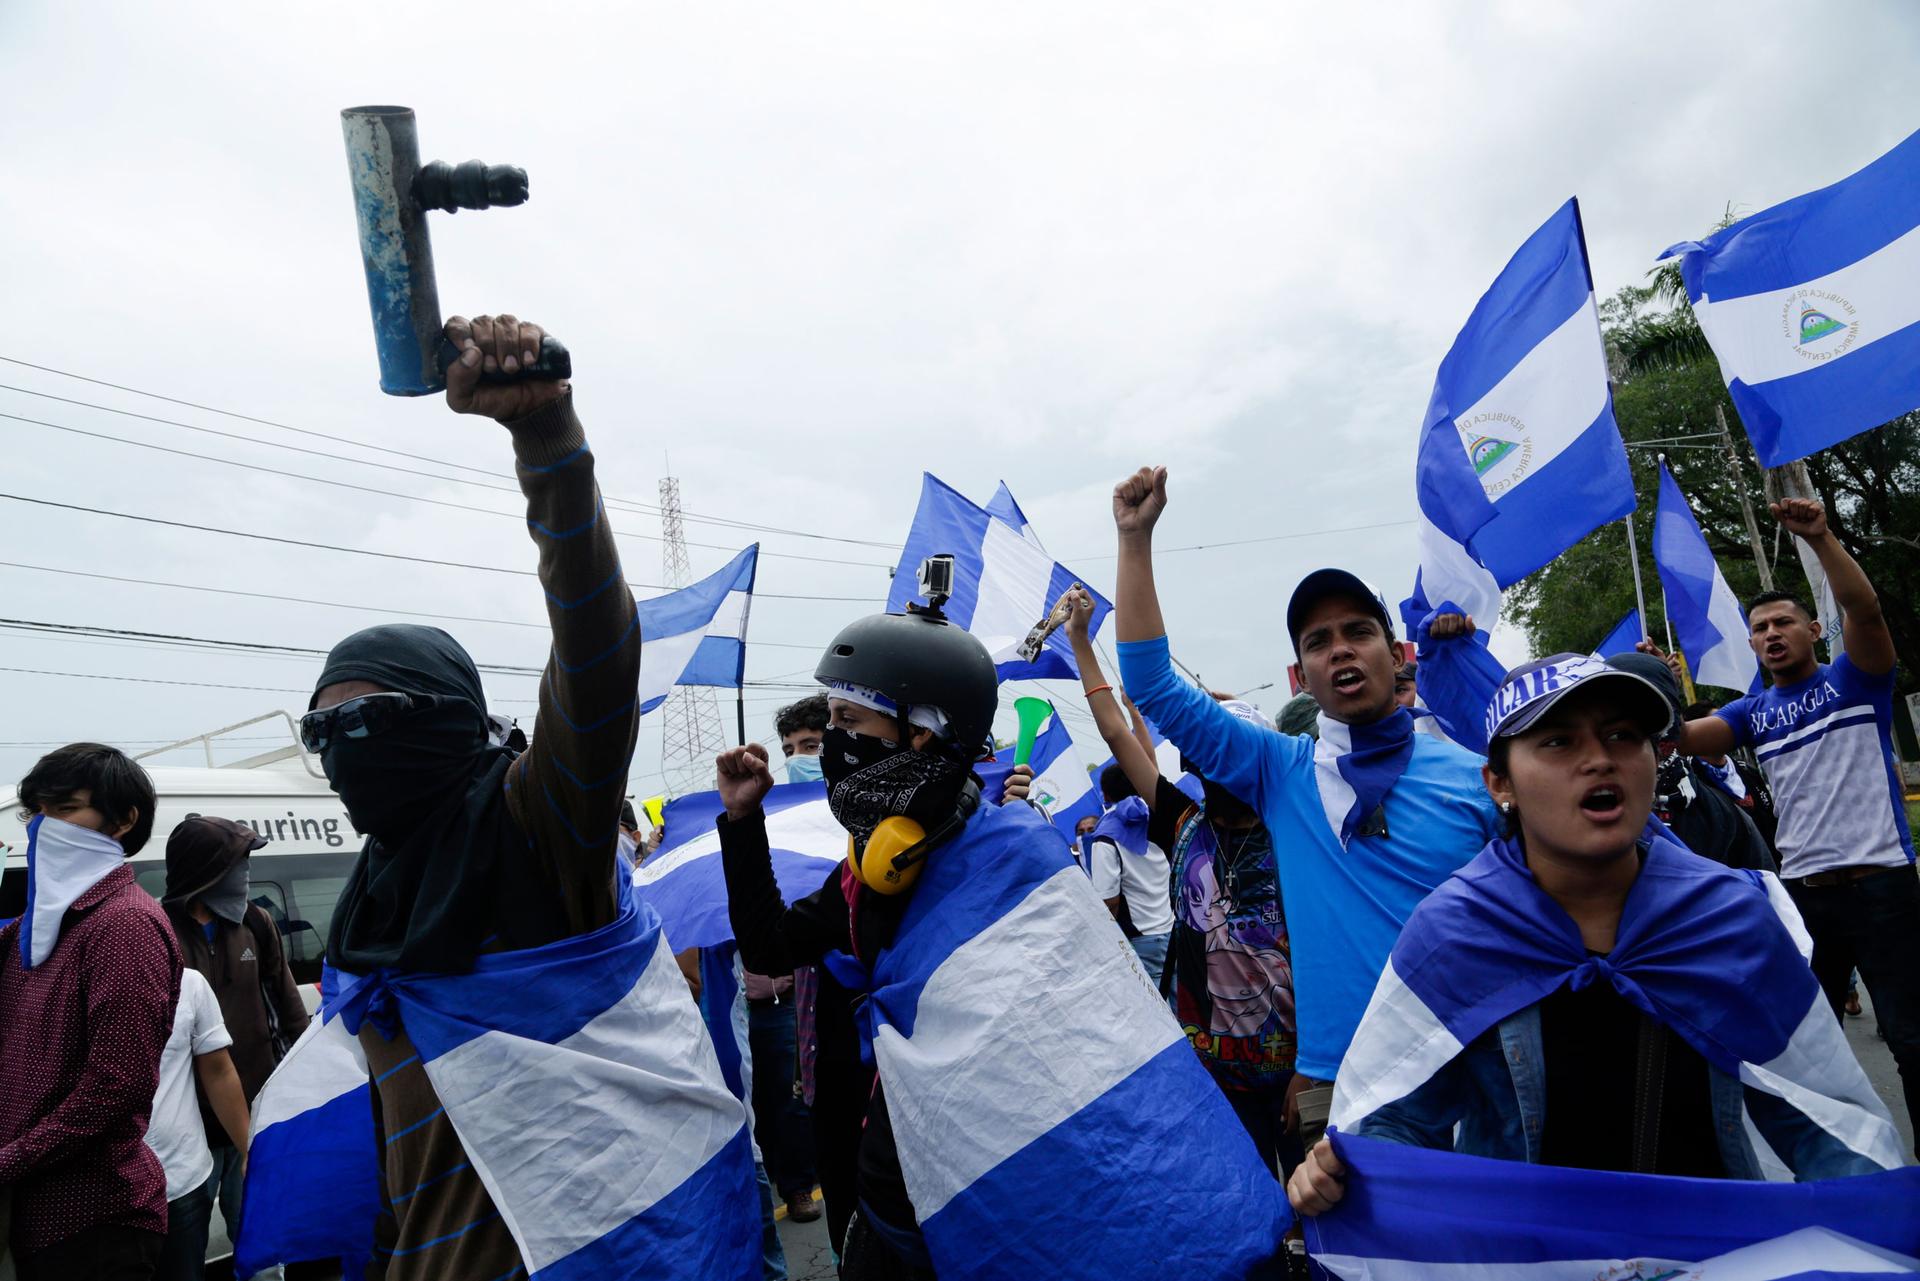 Demonstrators protest outside the Jesuit run Universidad Centroamericana, UCA, demanding the university's allocation of its share of 6% of the national budget, in Managua, Nicaragua, Thursday, Aug. 2, 2018.